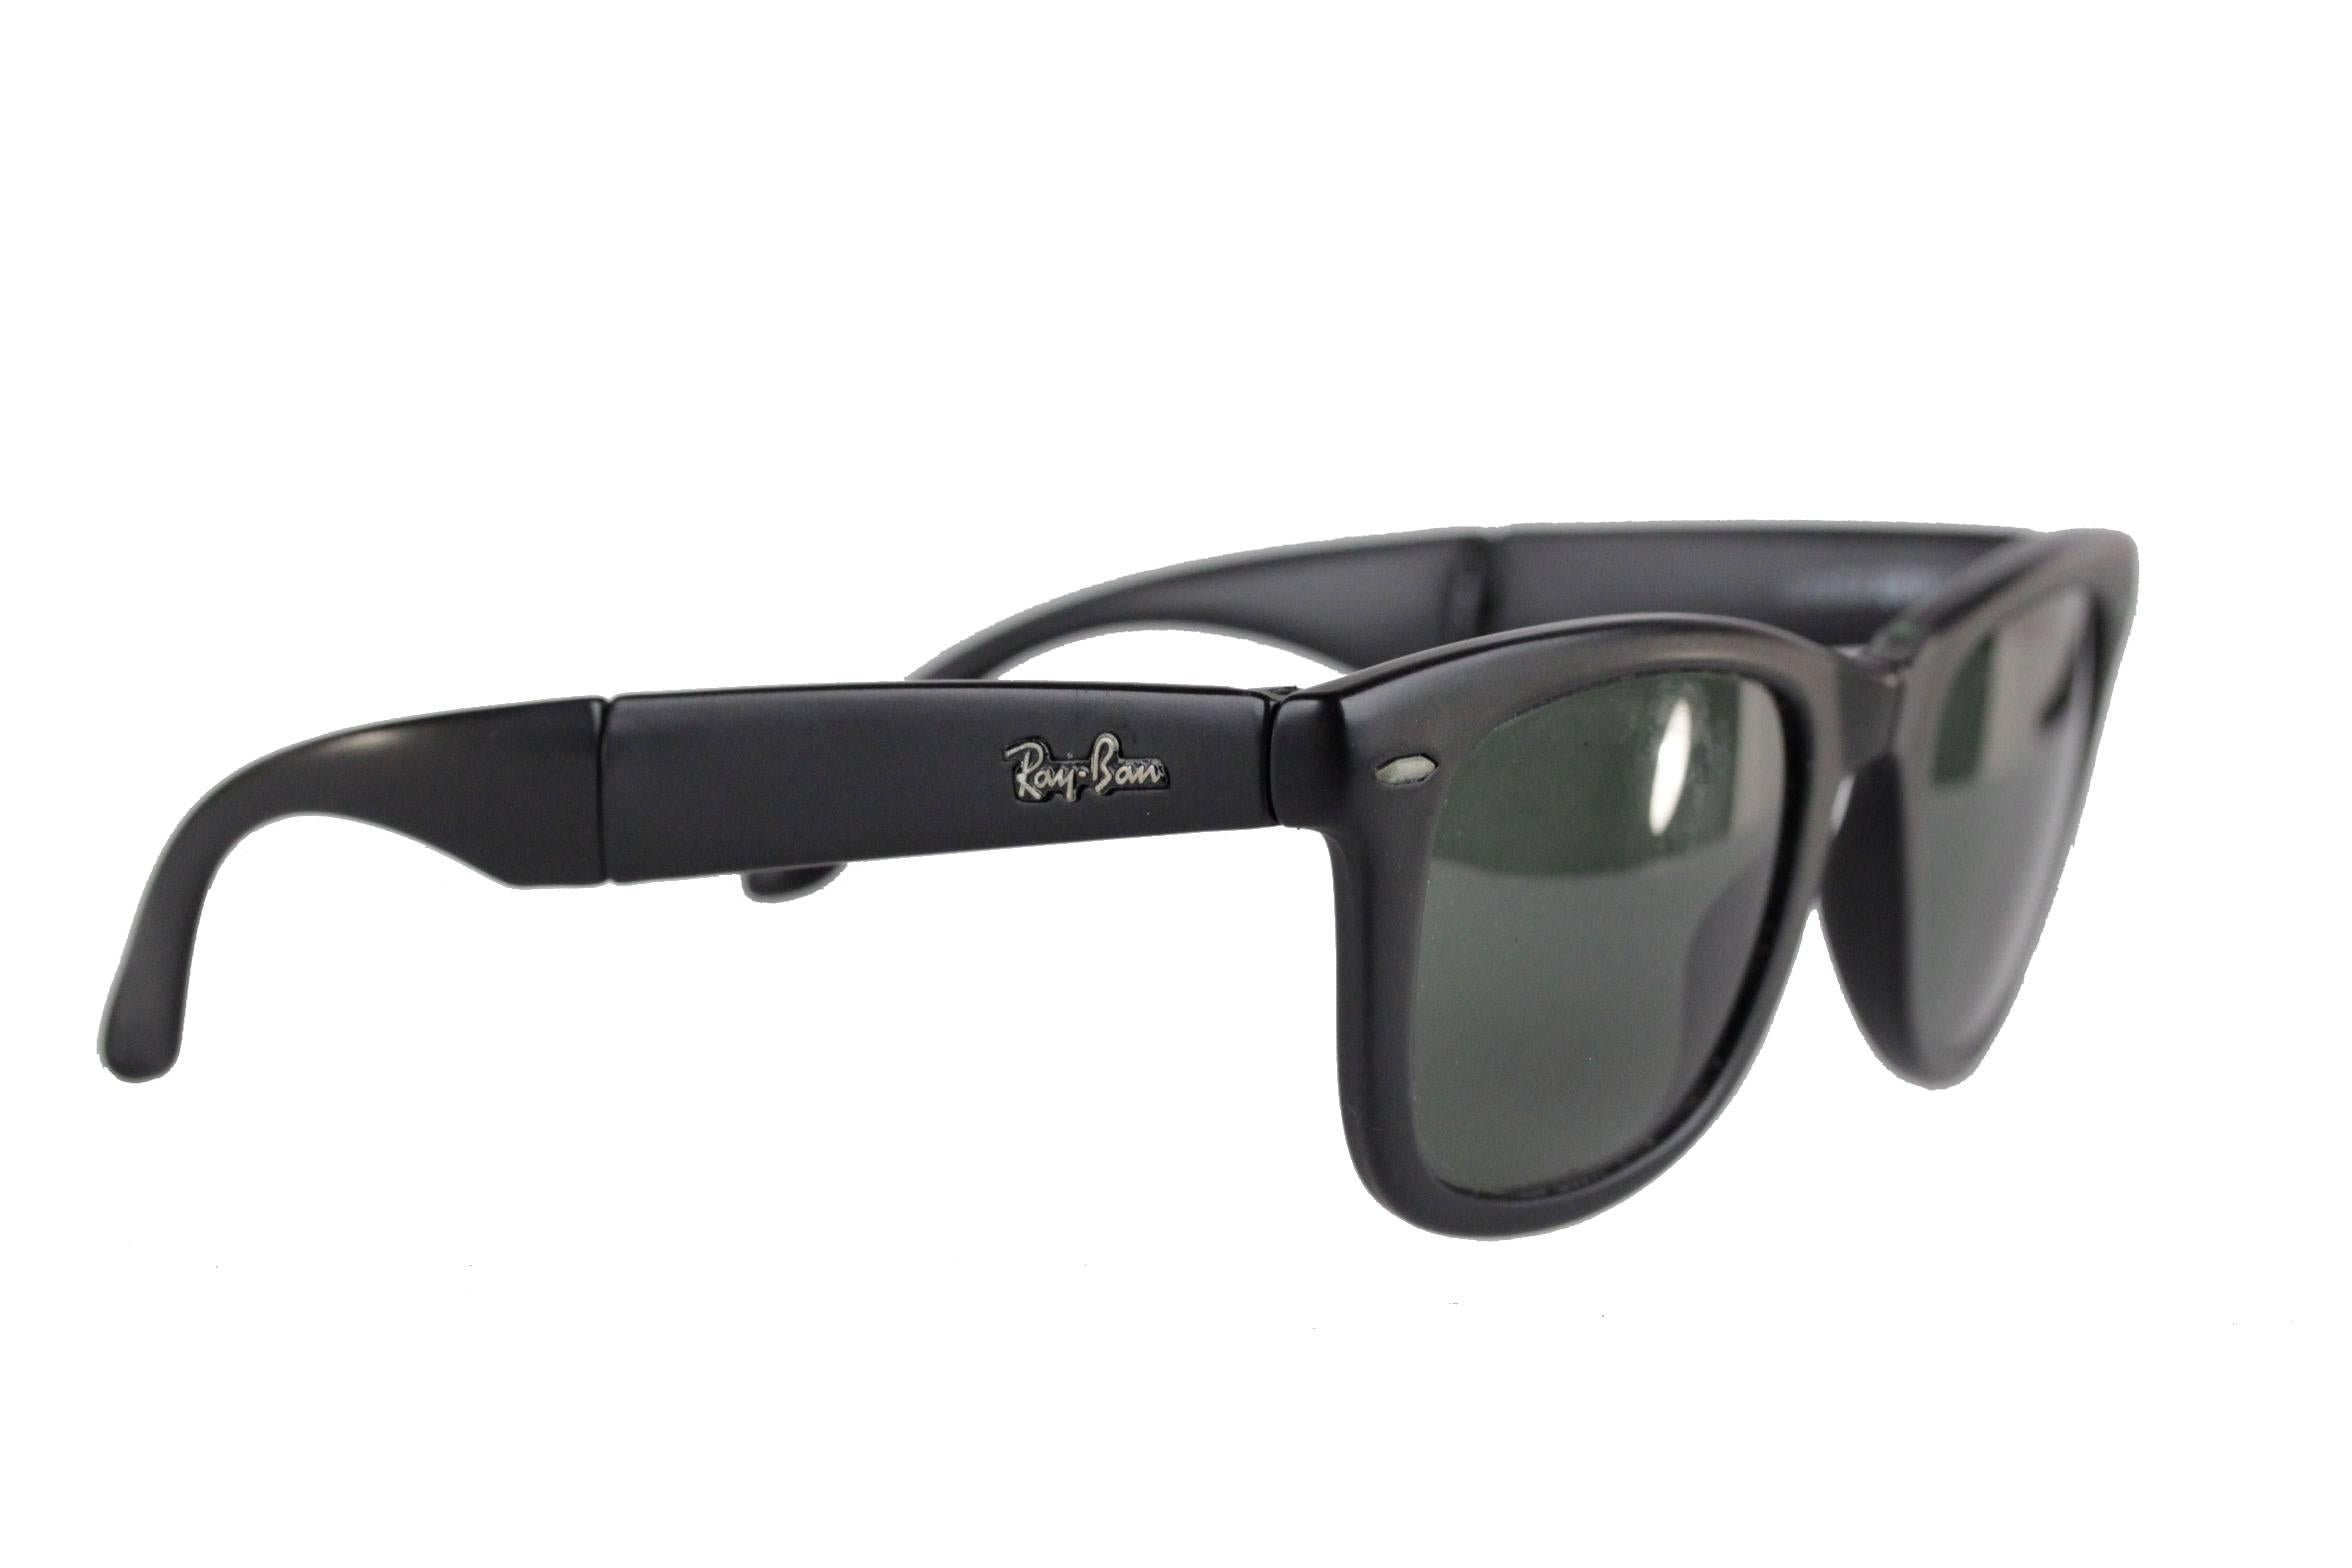  - Vintage Ray-Ban matte black folding Wayfarers
- Side stems that fold inward and front frame that fold inward
- Original classic B&L Ray-Ban G-15 anti-glare lenses ( both lenses laser etched BL near the hinges)
- The inside of one ear stem is